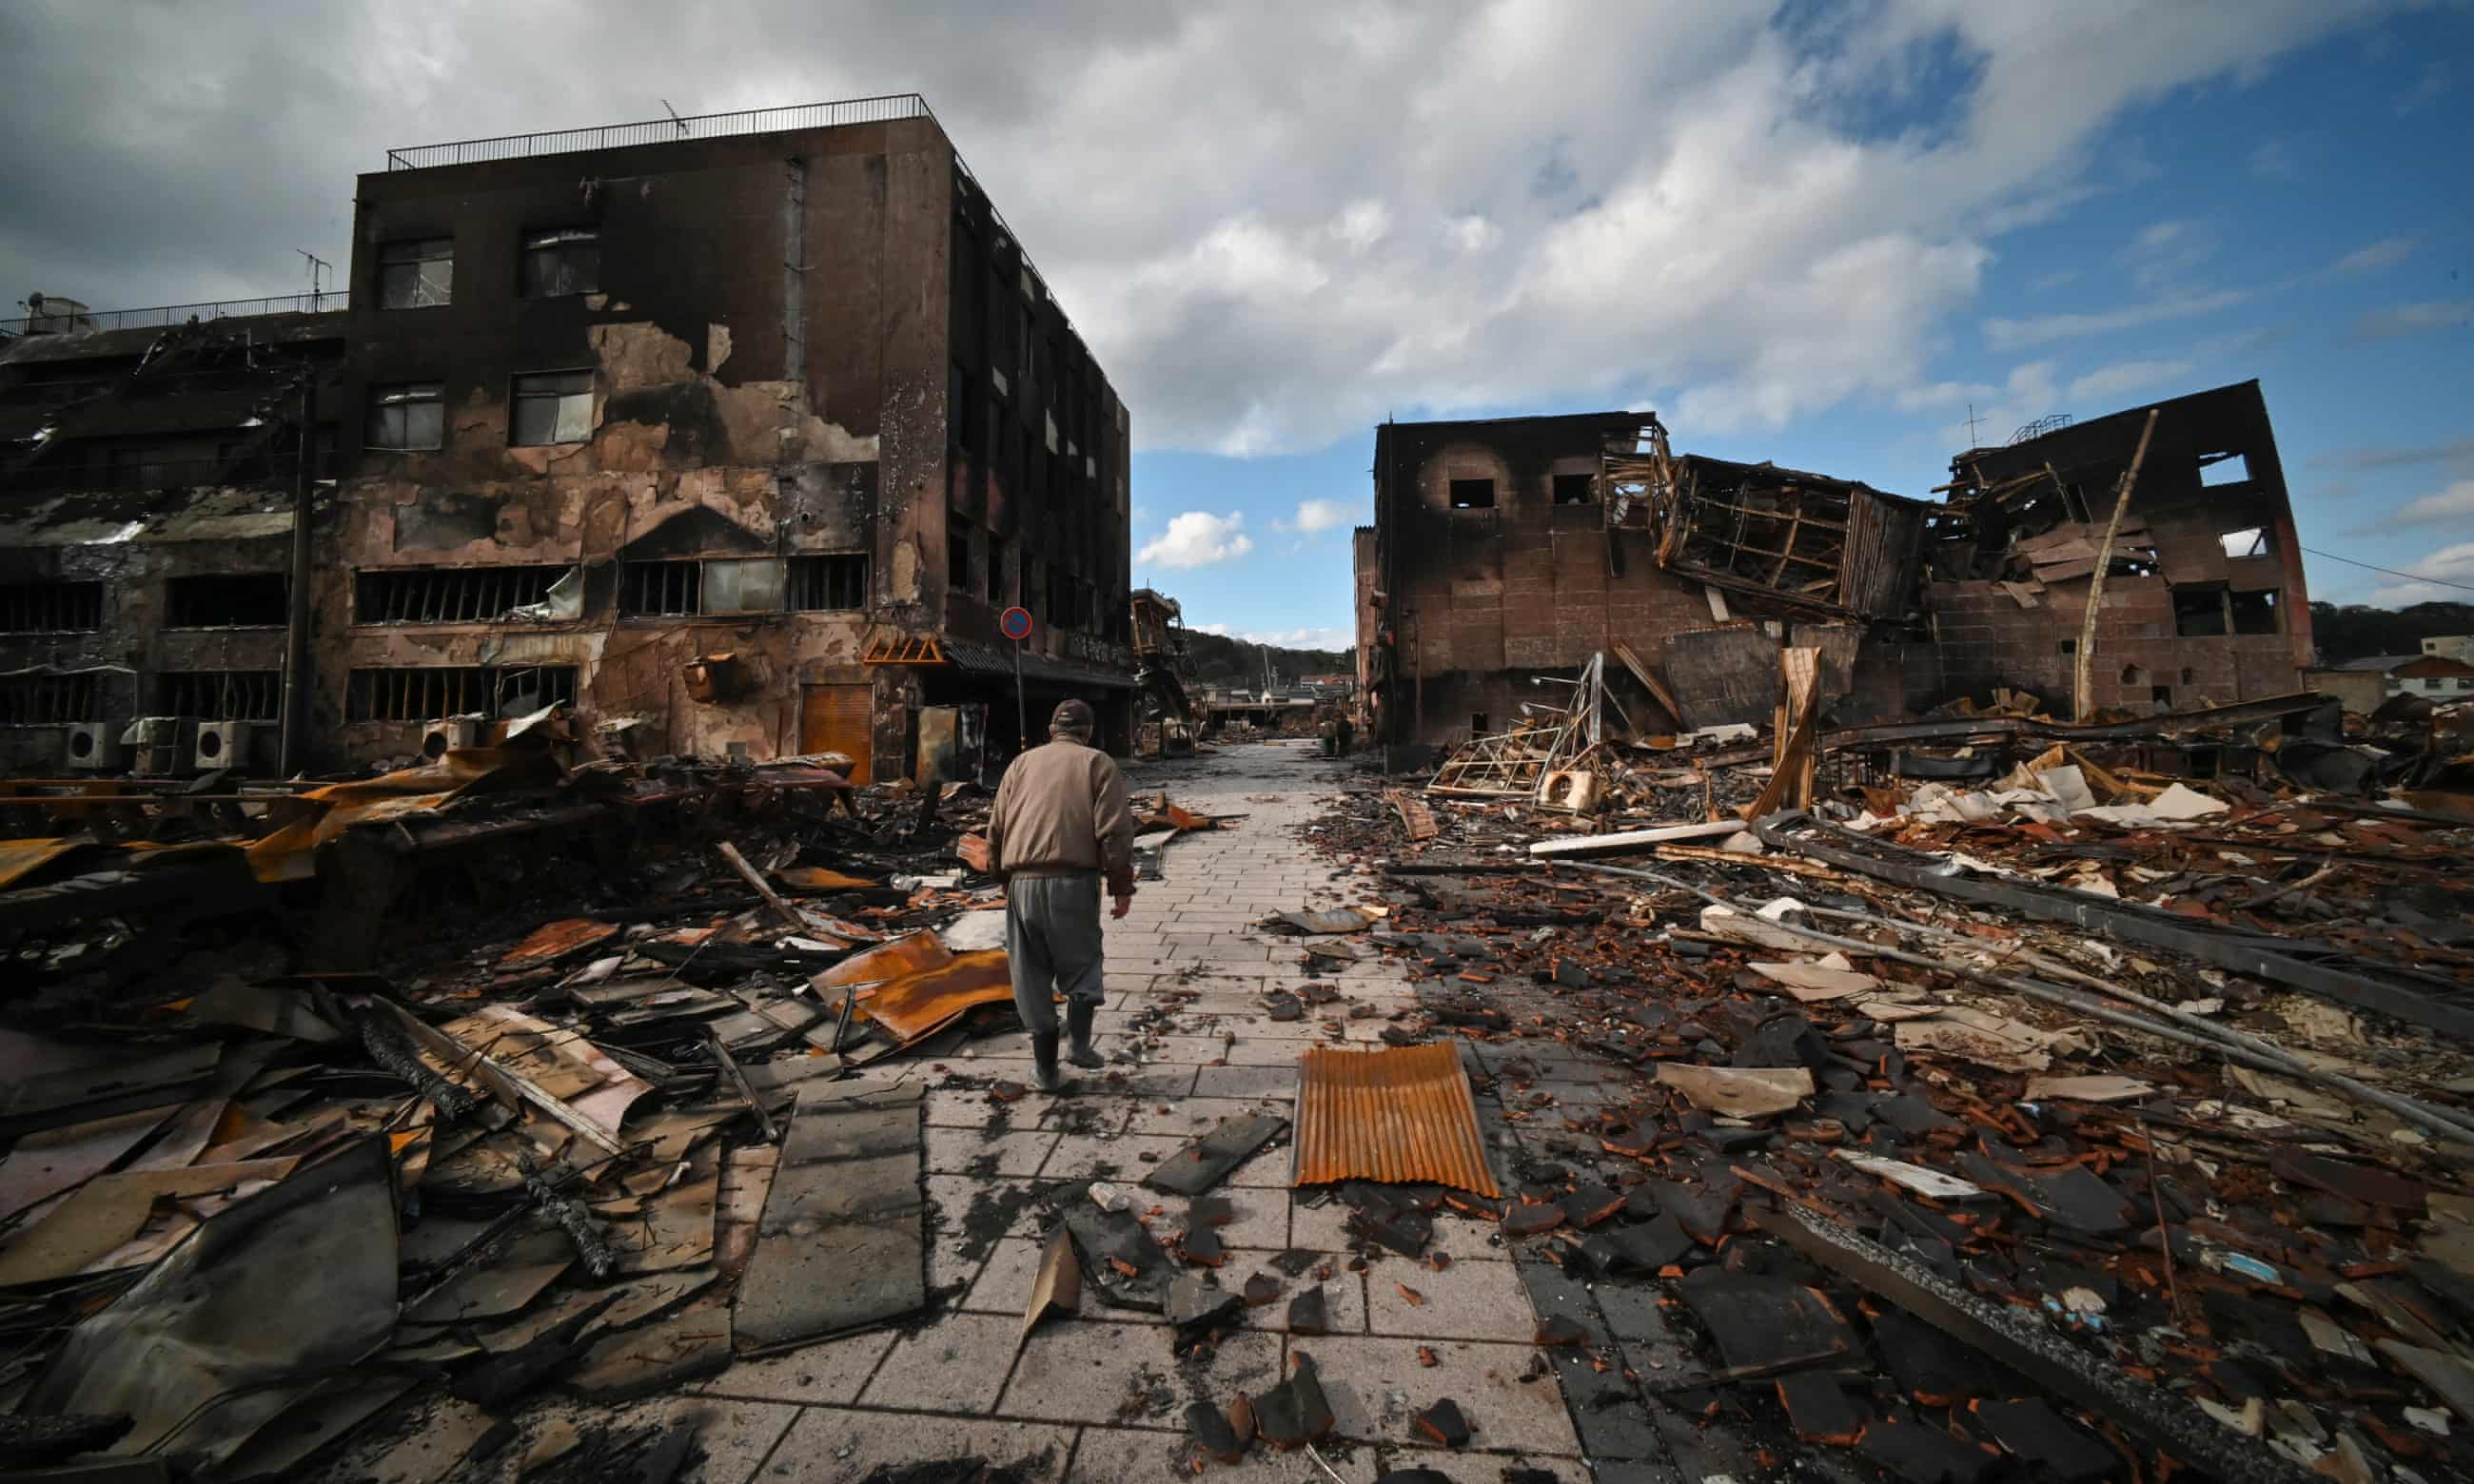 A man walks through the ruins of a shopping district in the city of Wajima, Ishikawa prefecture, Japan after an earthquake. Photograph: AFP/Getty Images